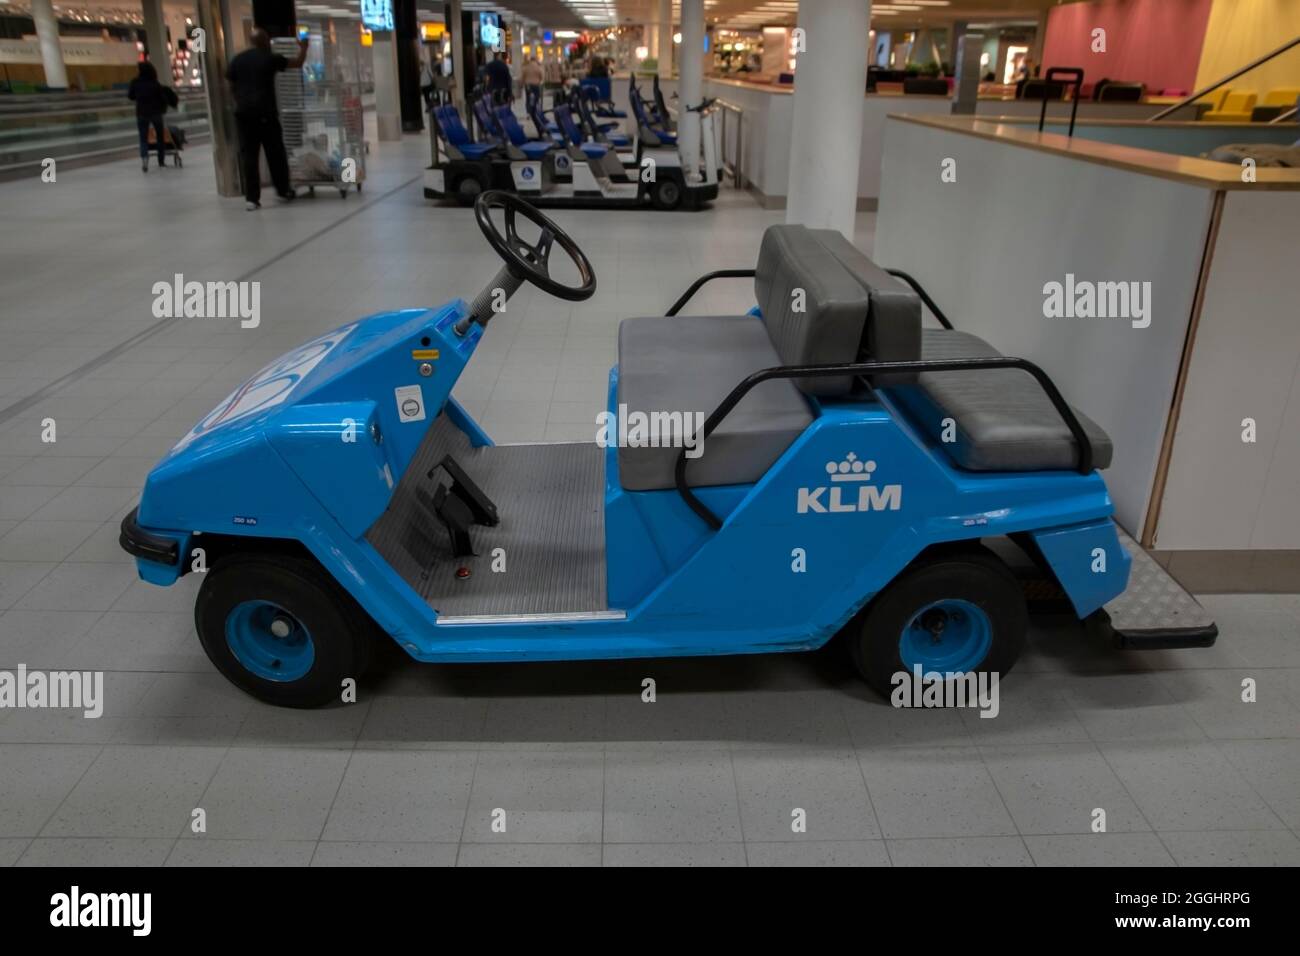 KLM Helping Car At Schiphol Airport The Netherlands 7-12-2019 Stock Photo